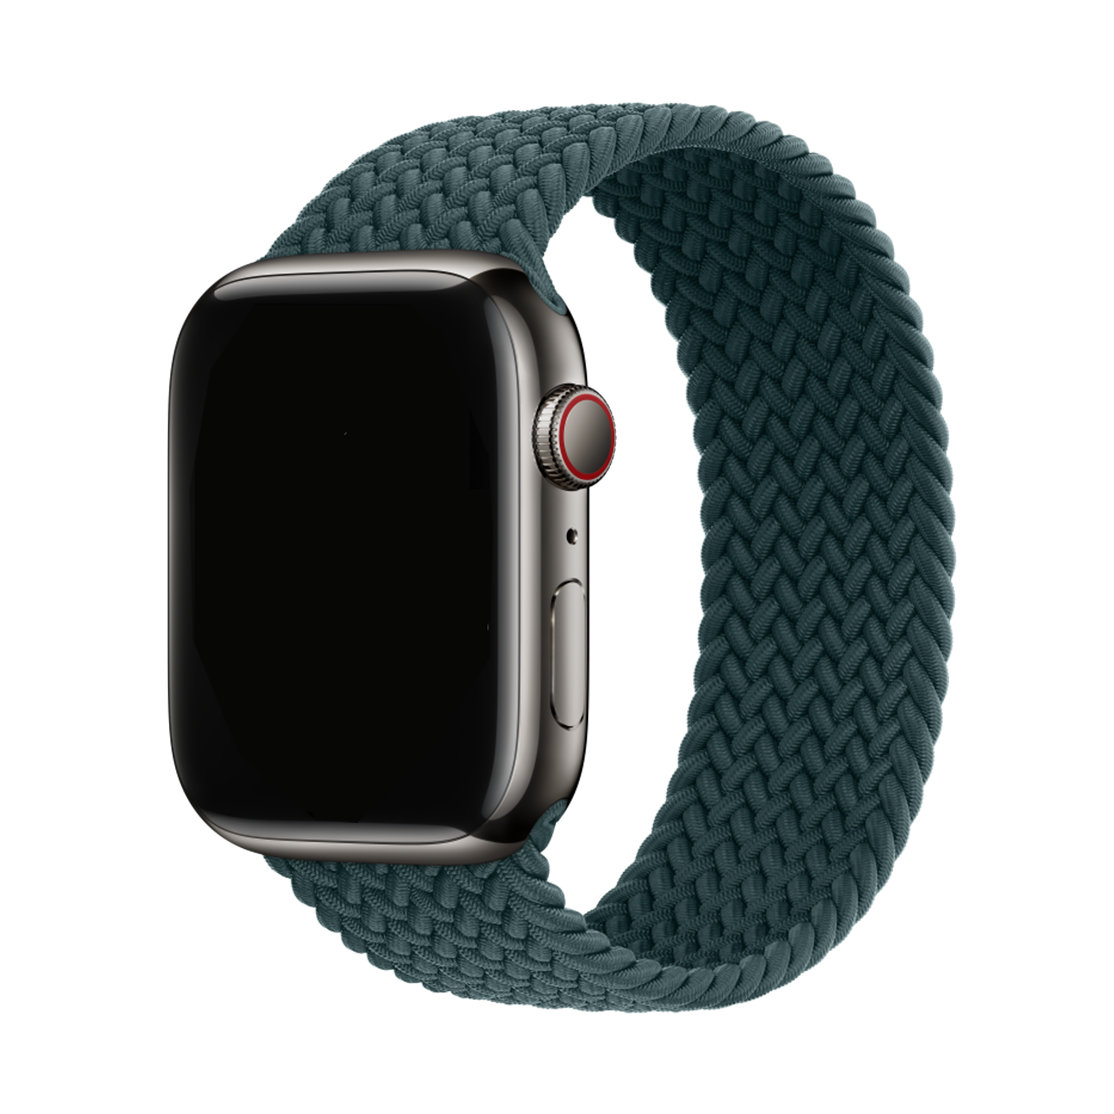 Apple Braided Solo Loop Apple Watch Band Rainforest